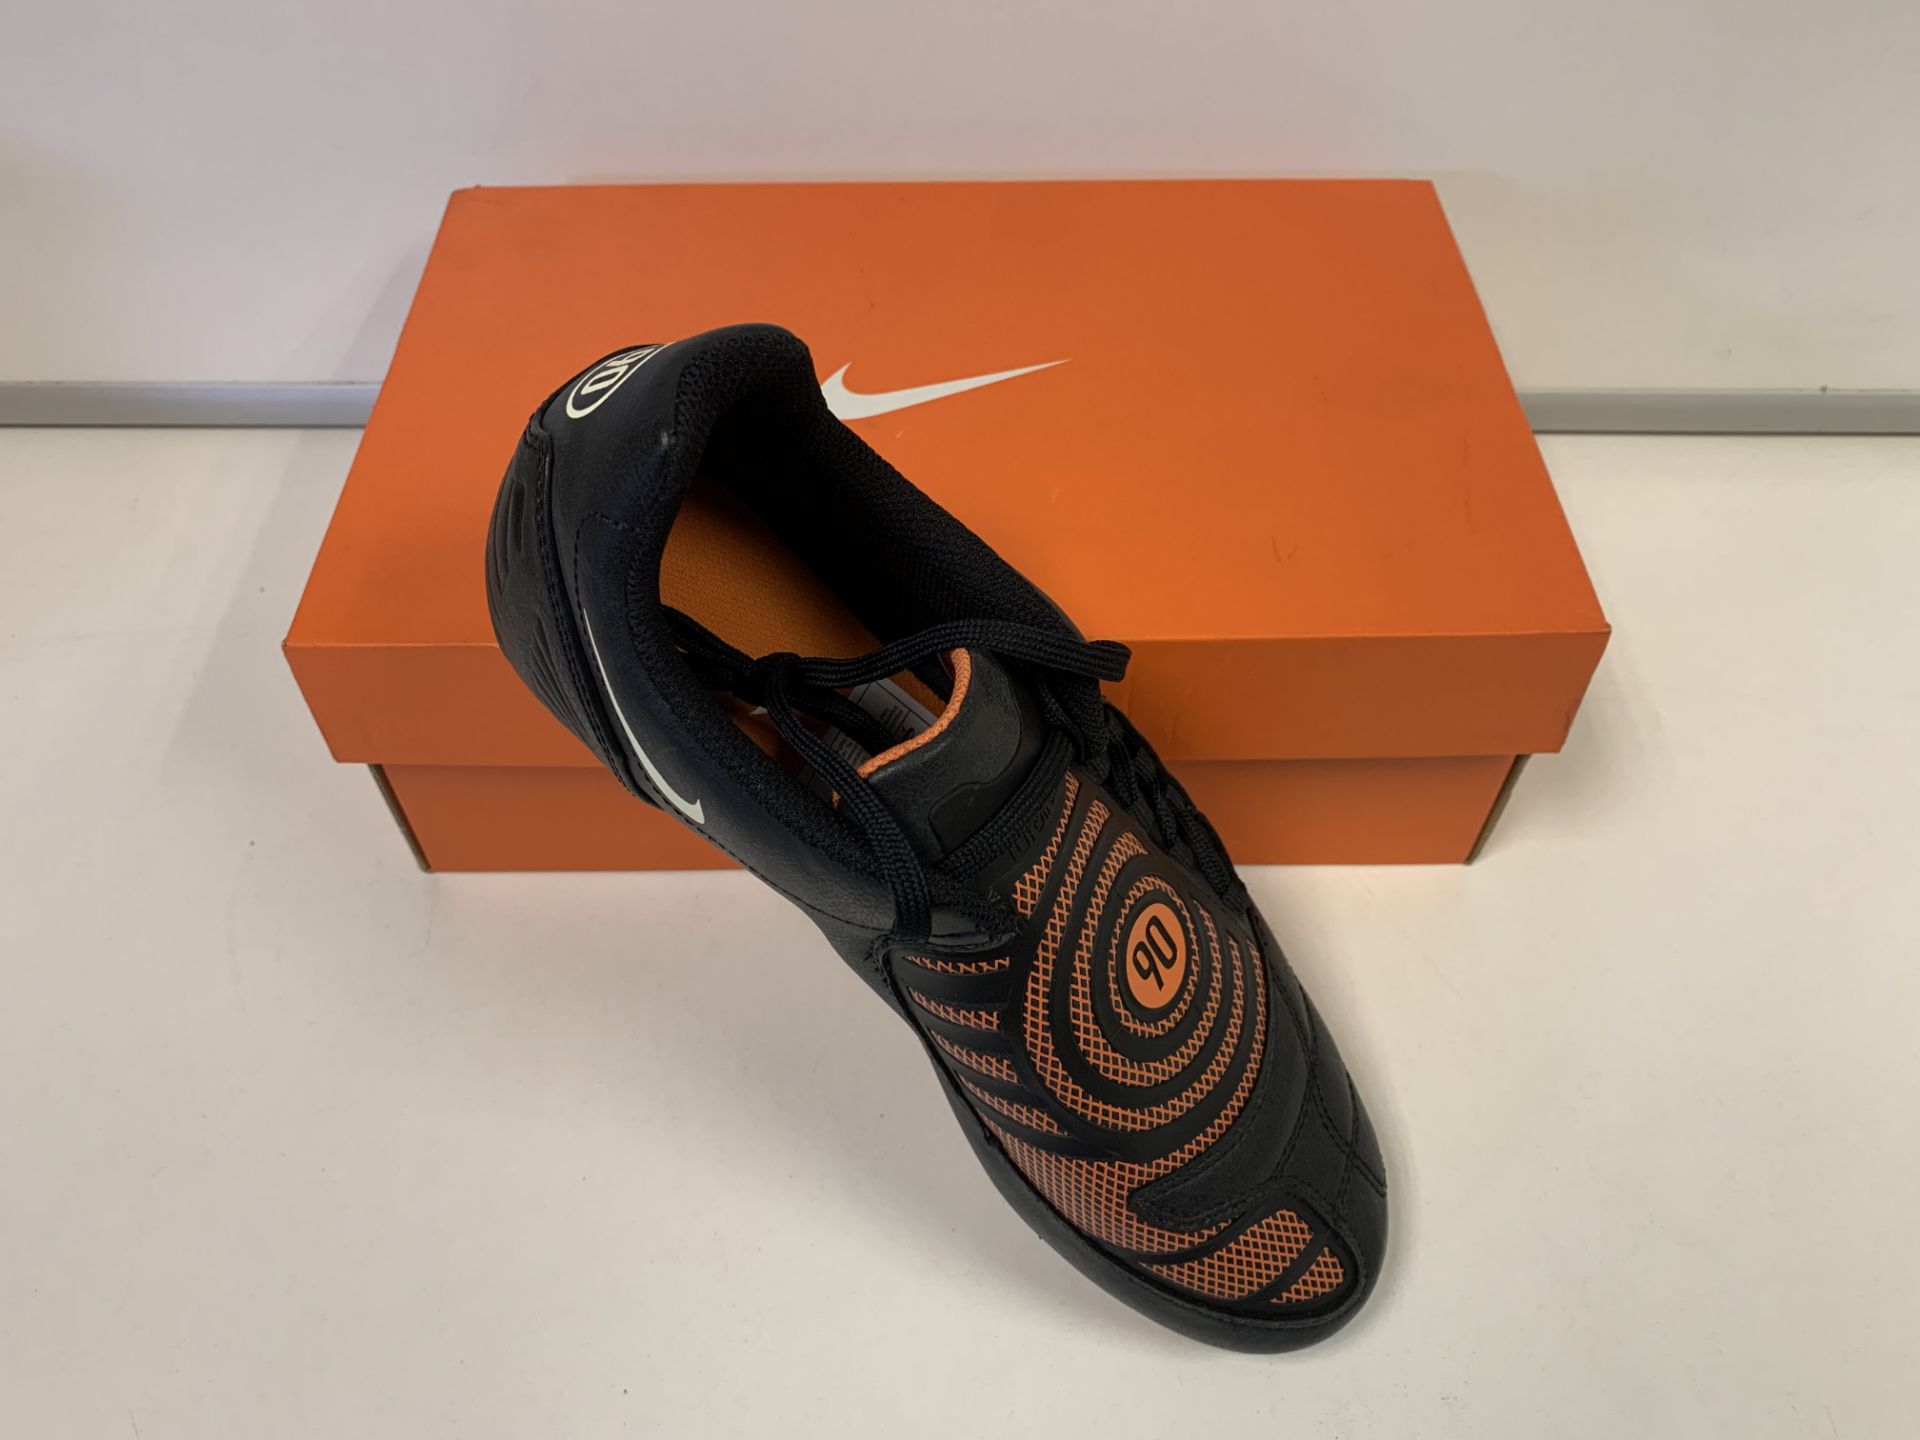 (NO VAT) 3 X BRAND NEW RETAIL BOXED NIKE JR TOTAL 90 SHOOT 2 EXTRA SG FOOTBALL BOOTS SIZE 5